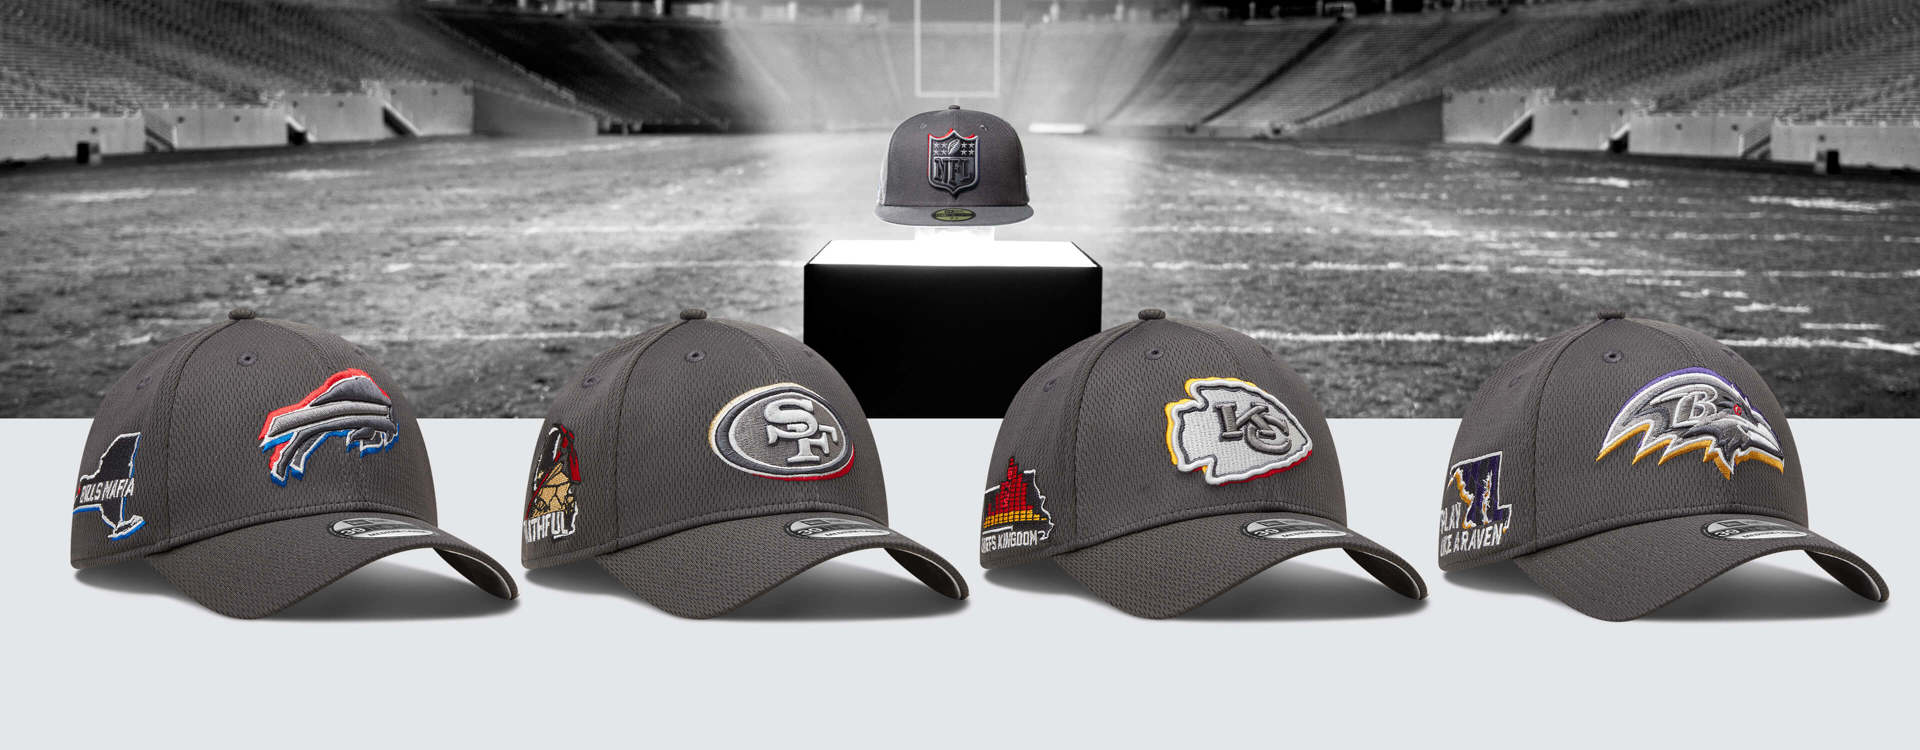 four grey nfl caps showcasing different teams with a football stadium background